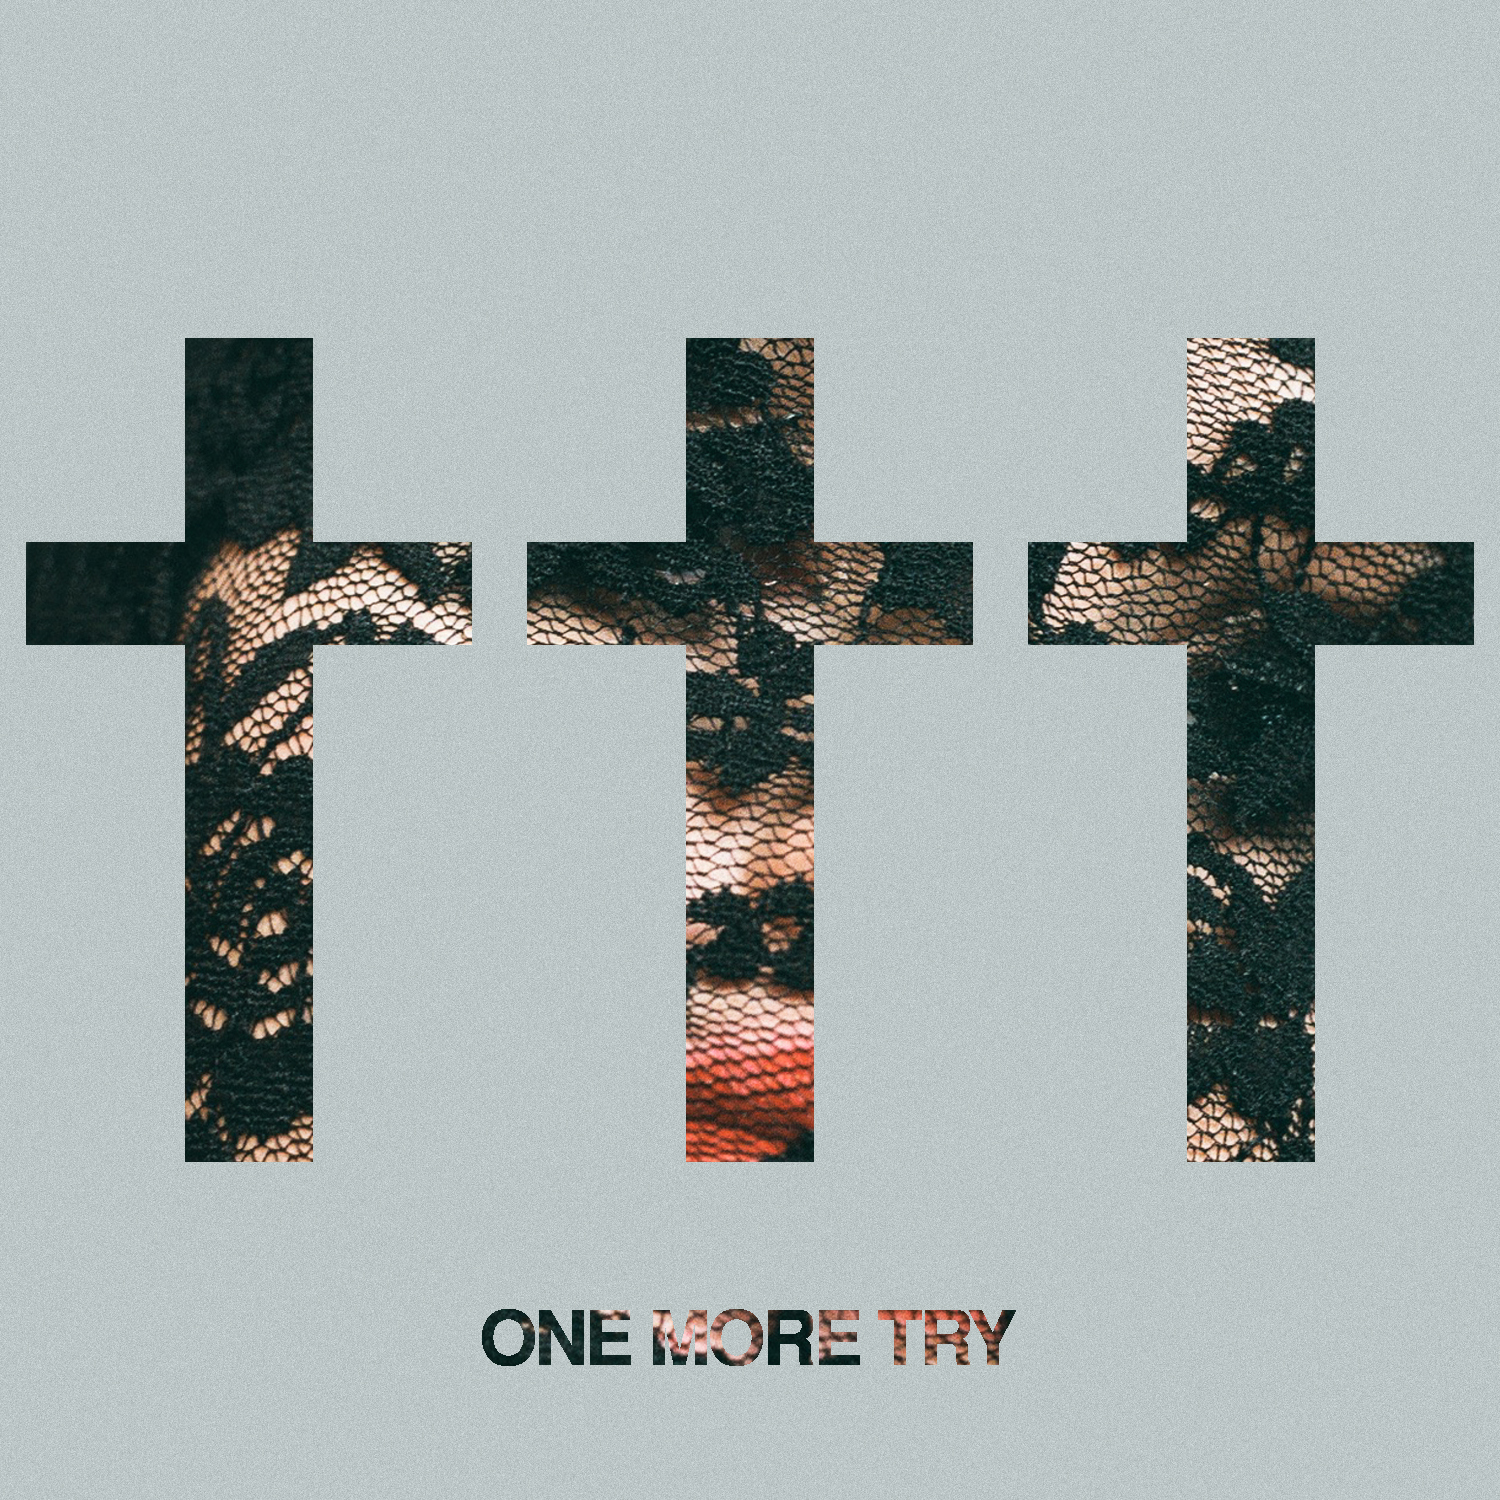 †††: One More Try